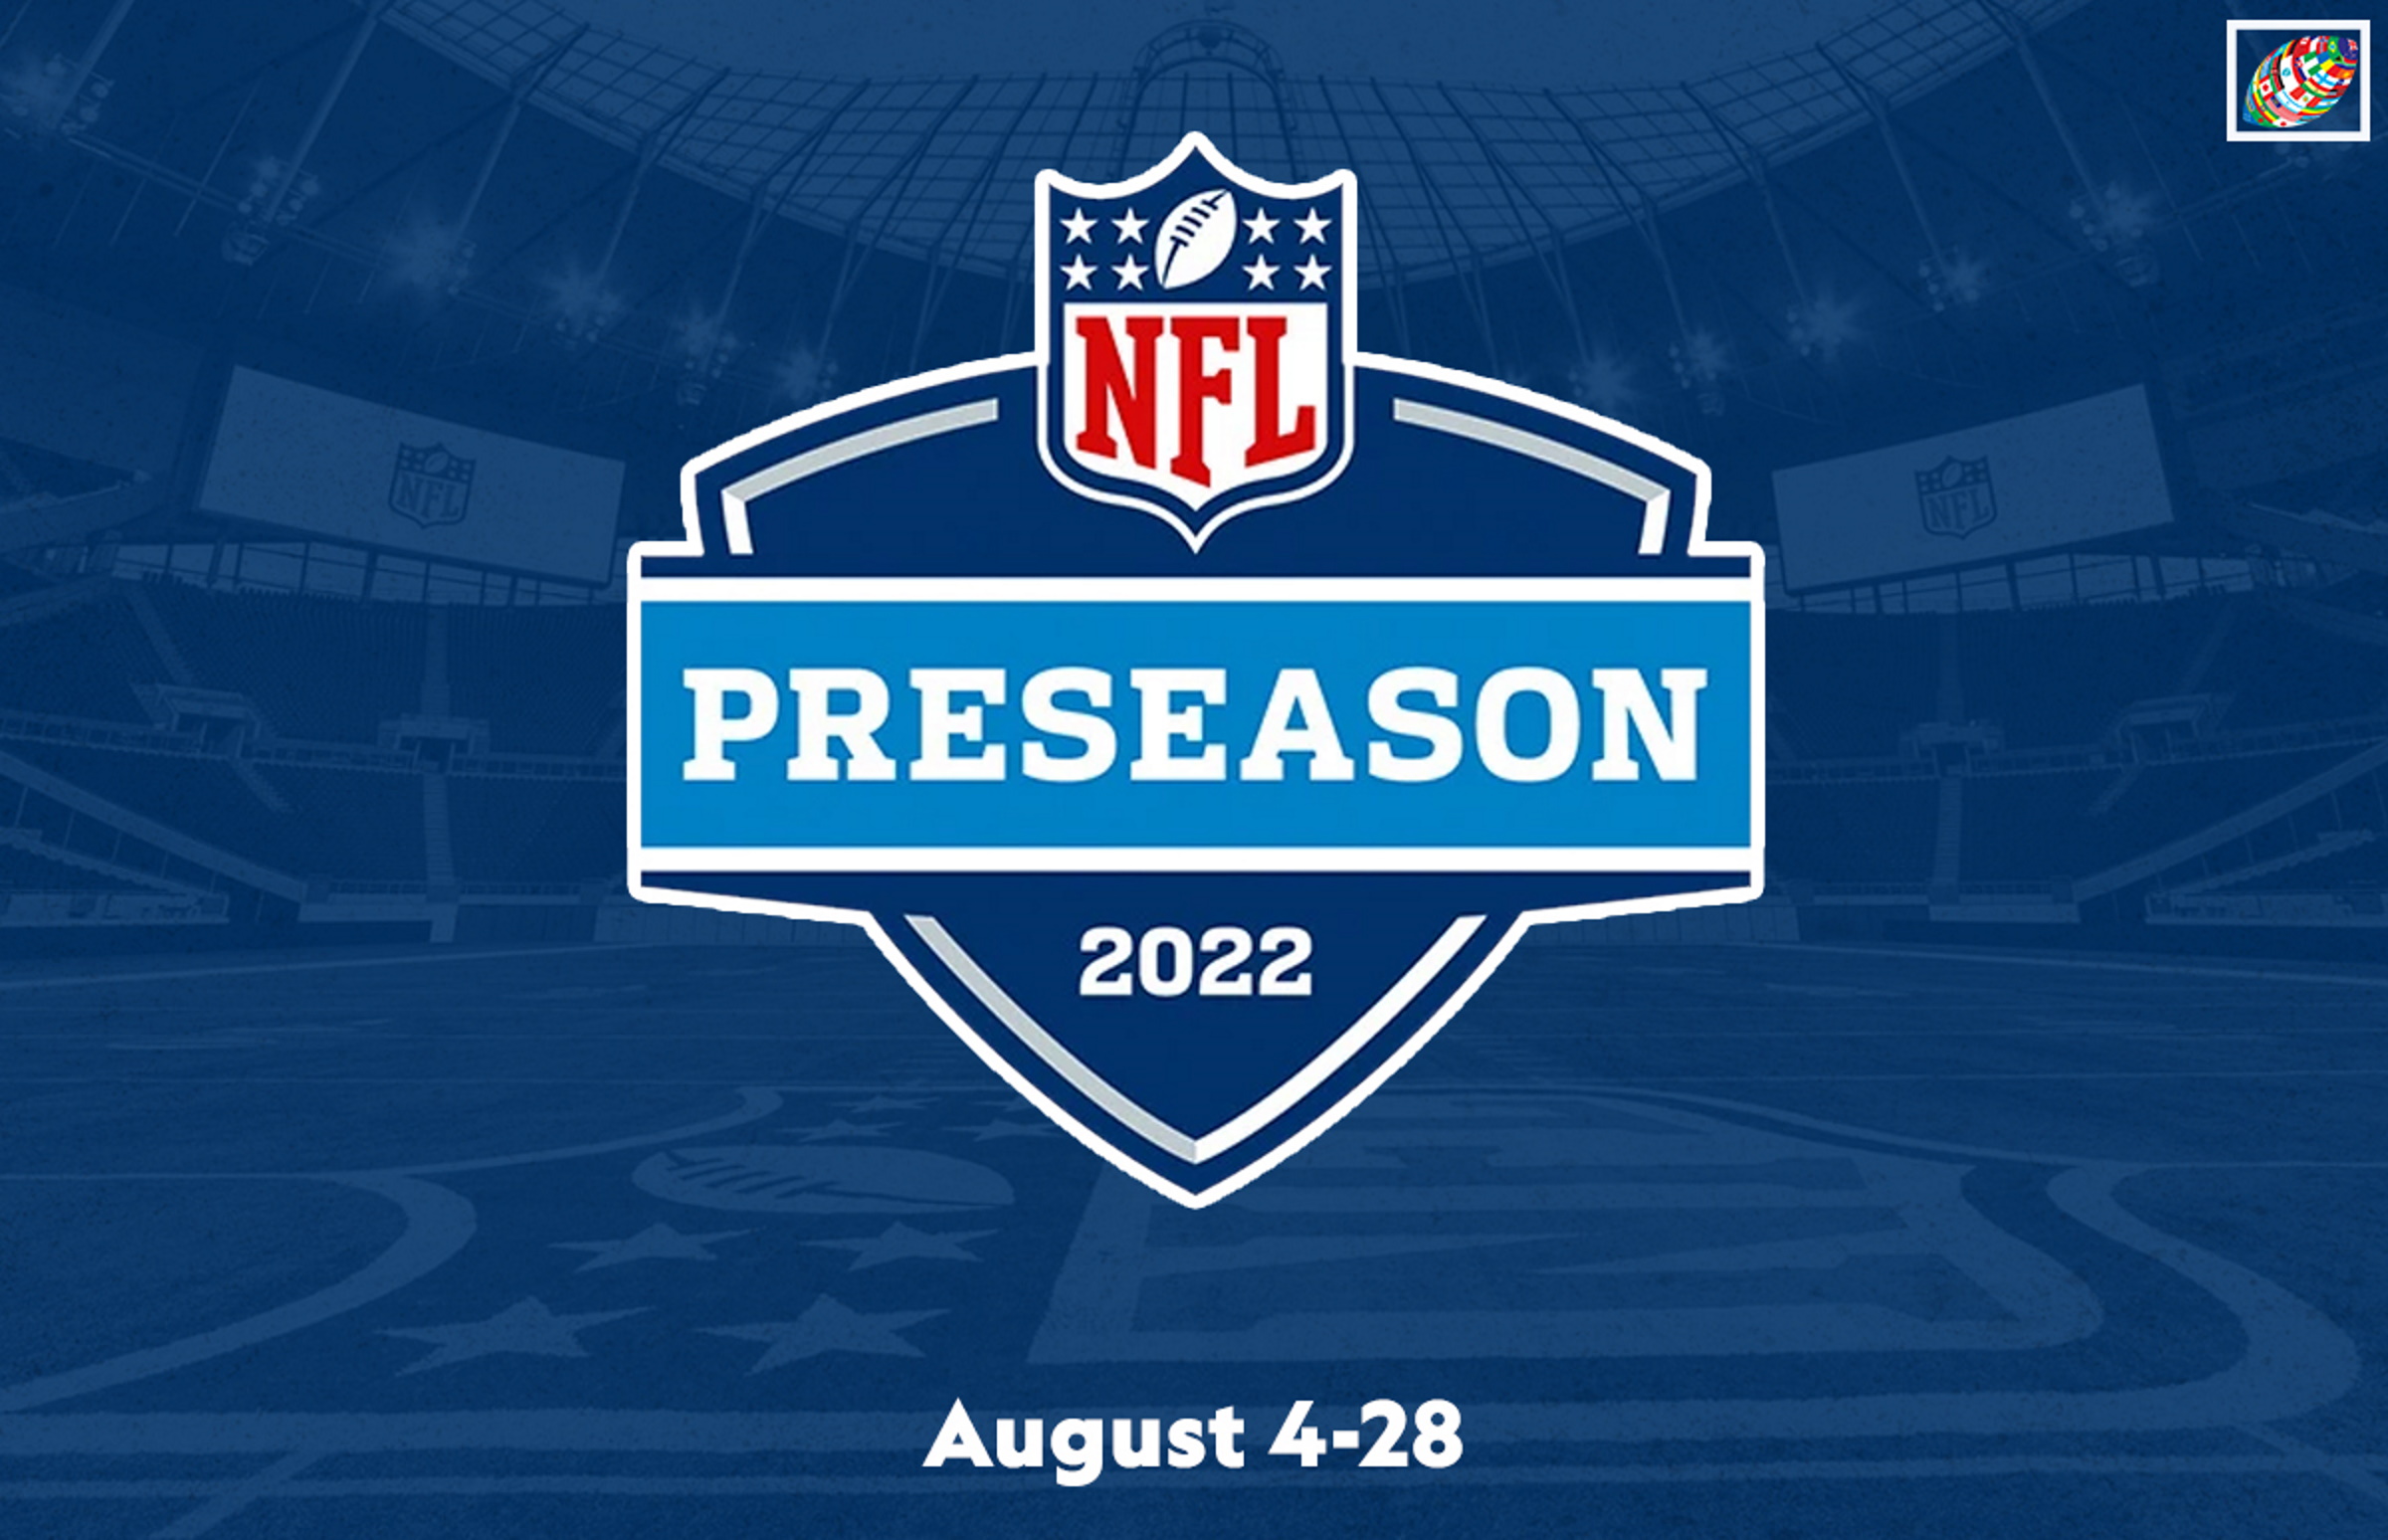 2022 NFL Preseason: Dates, details and more to look out for